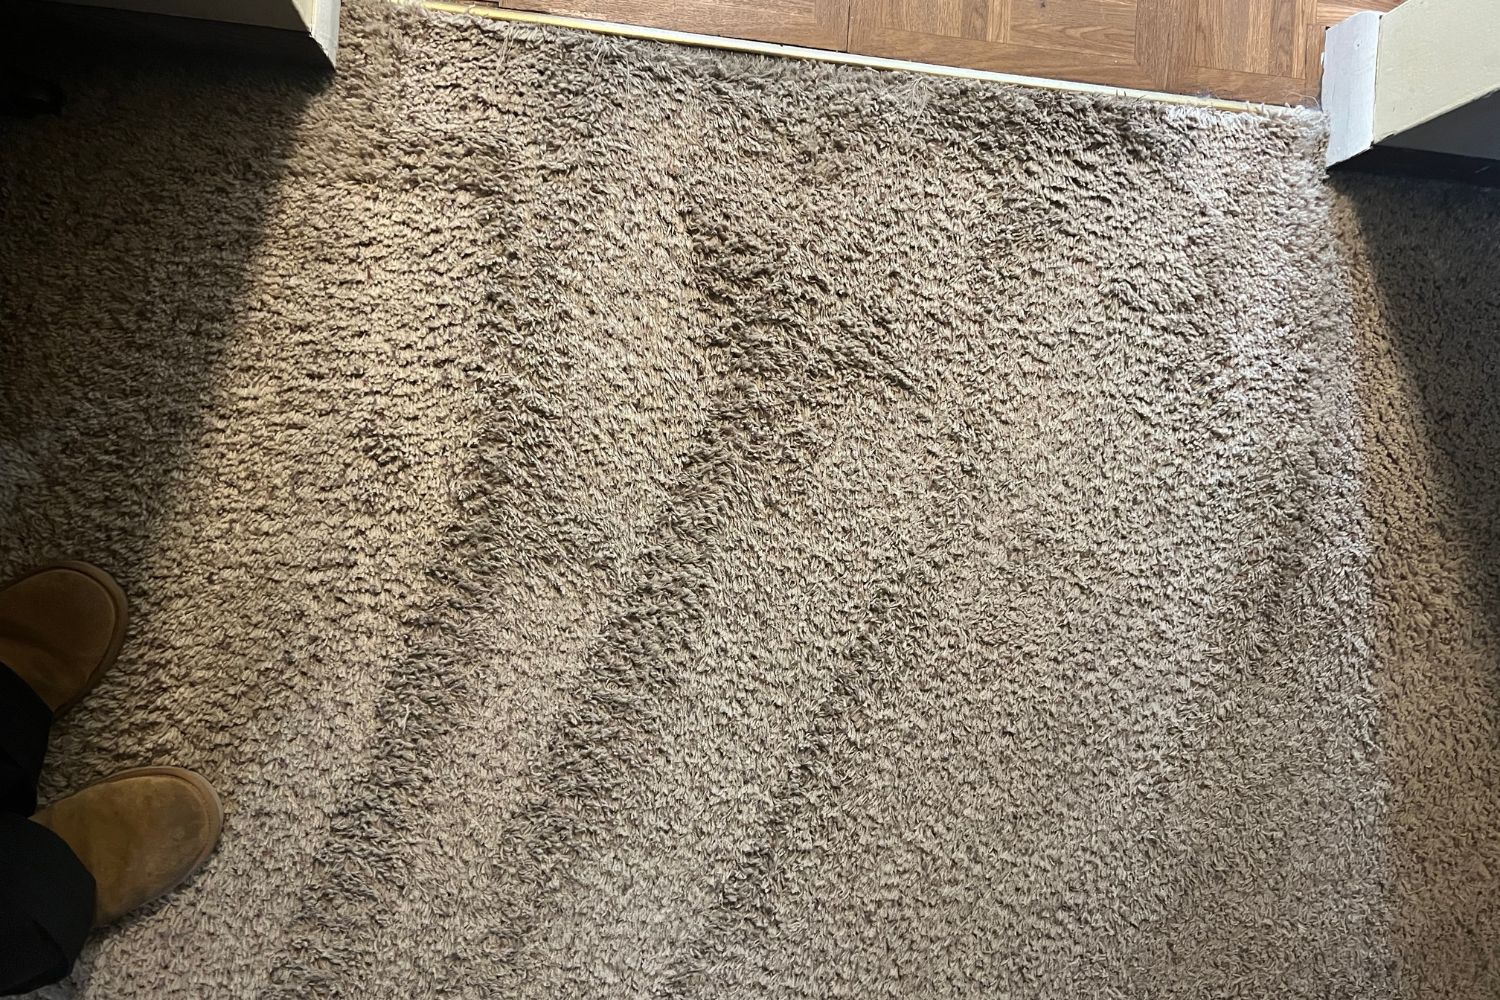 Tan carpet that has just been cleaned with Bissell carpet cleaner